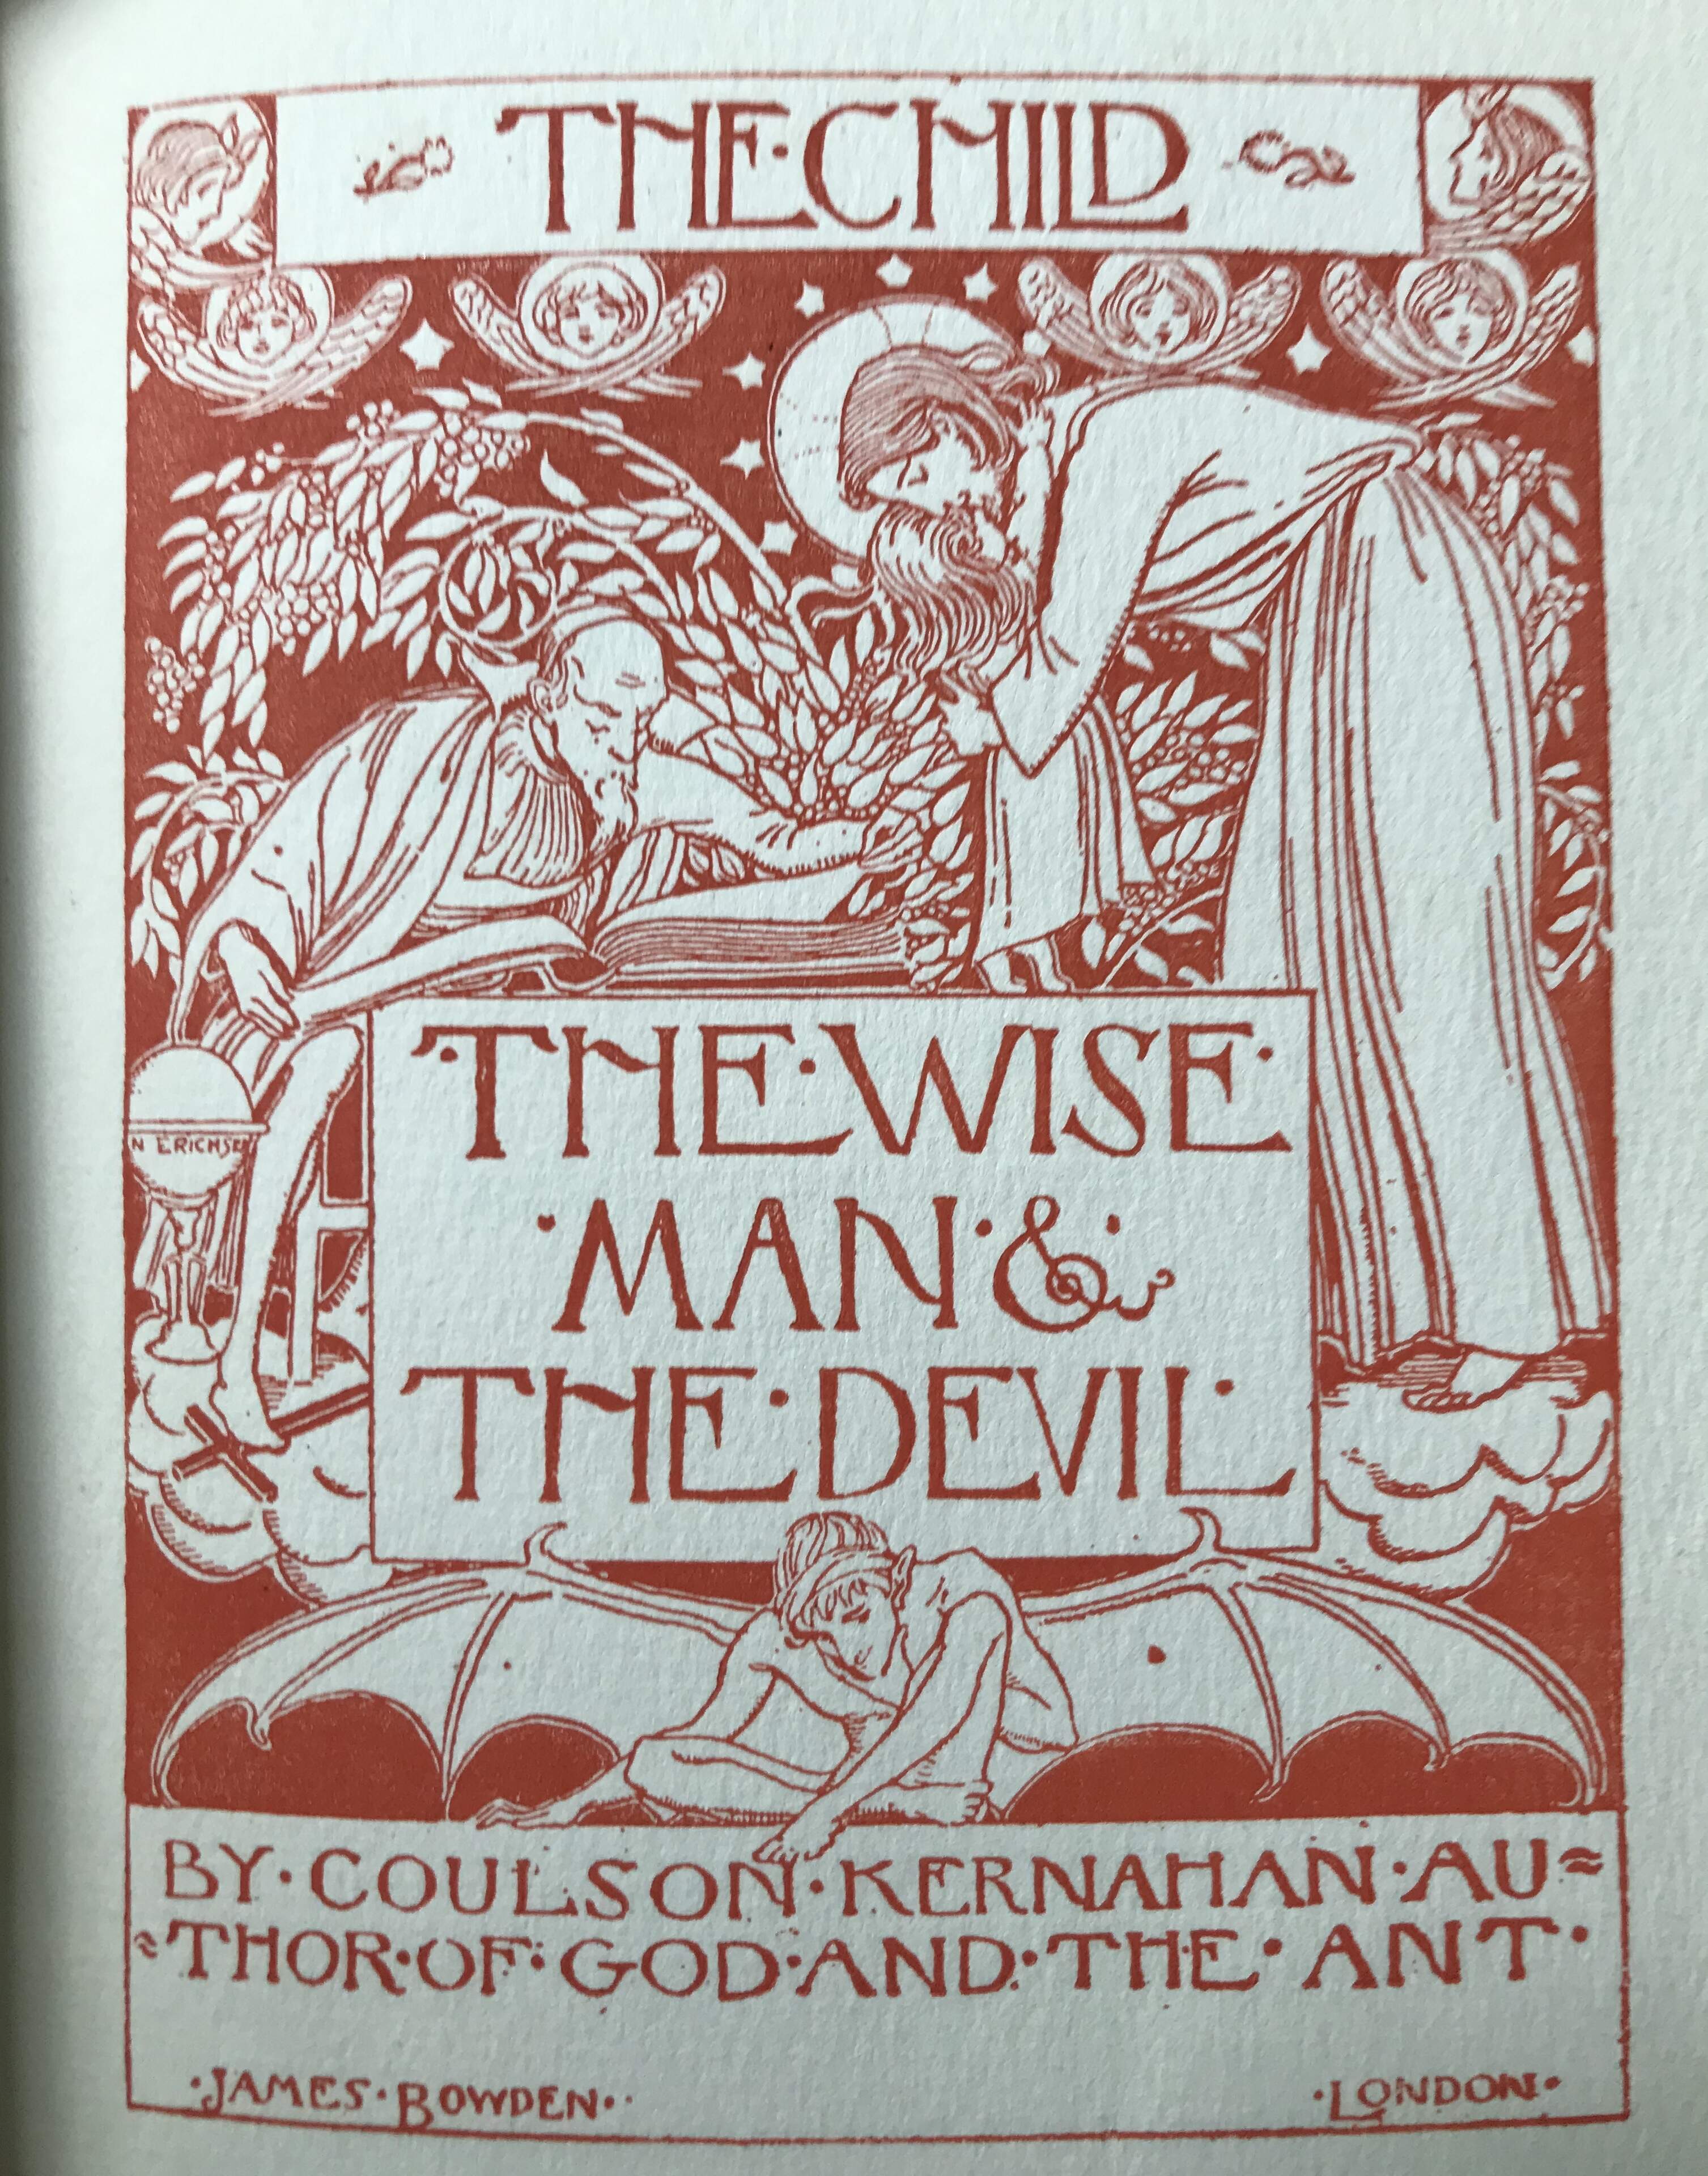 The Child, The Wise Man, & The Devil by Coulson Kernahan